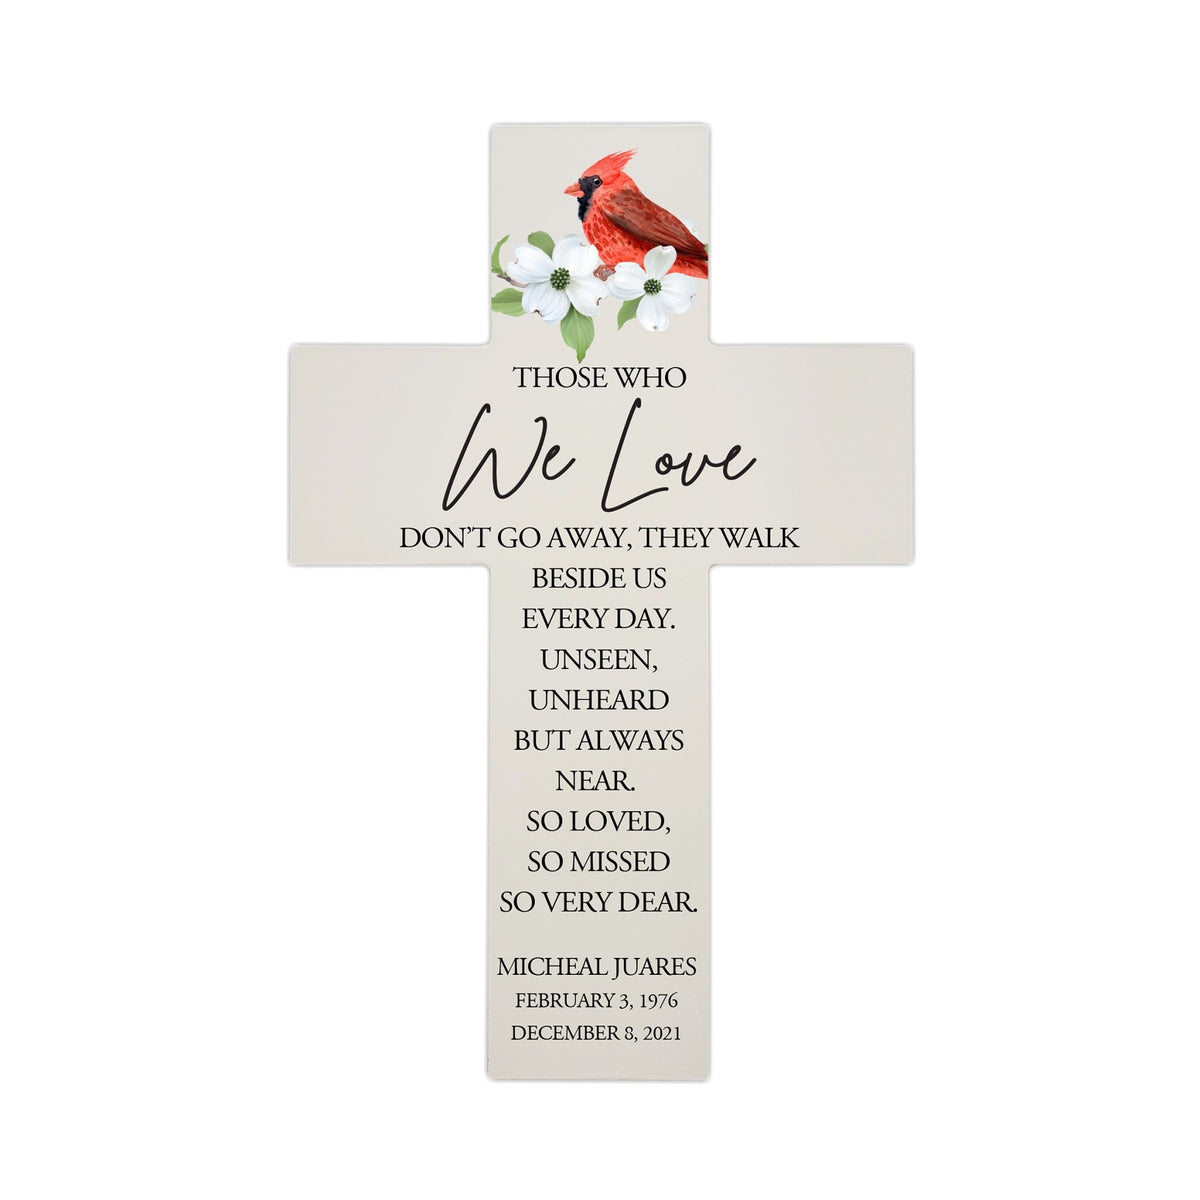 Personalized Red Cardinal Memorial Bereavement Wall Cross For Loss of Loved One Those Who We Love (Cardinal) Quote 14 x 9.25 Those Who We Love Don&#39;t Go Away, They Walk Beside Us Everyday - LifeSong Milestones